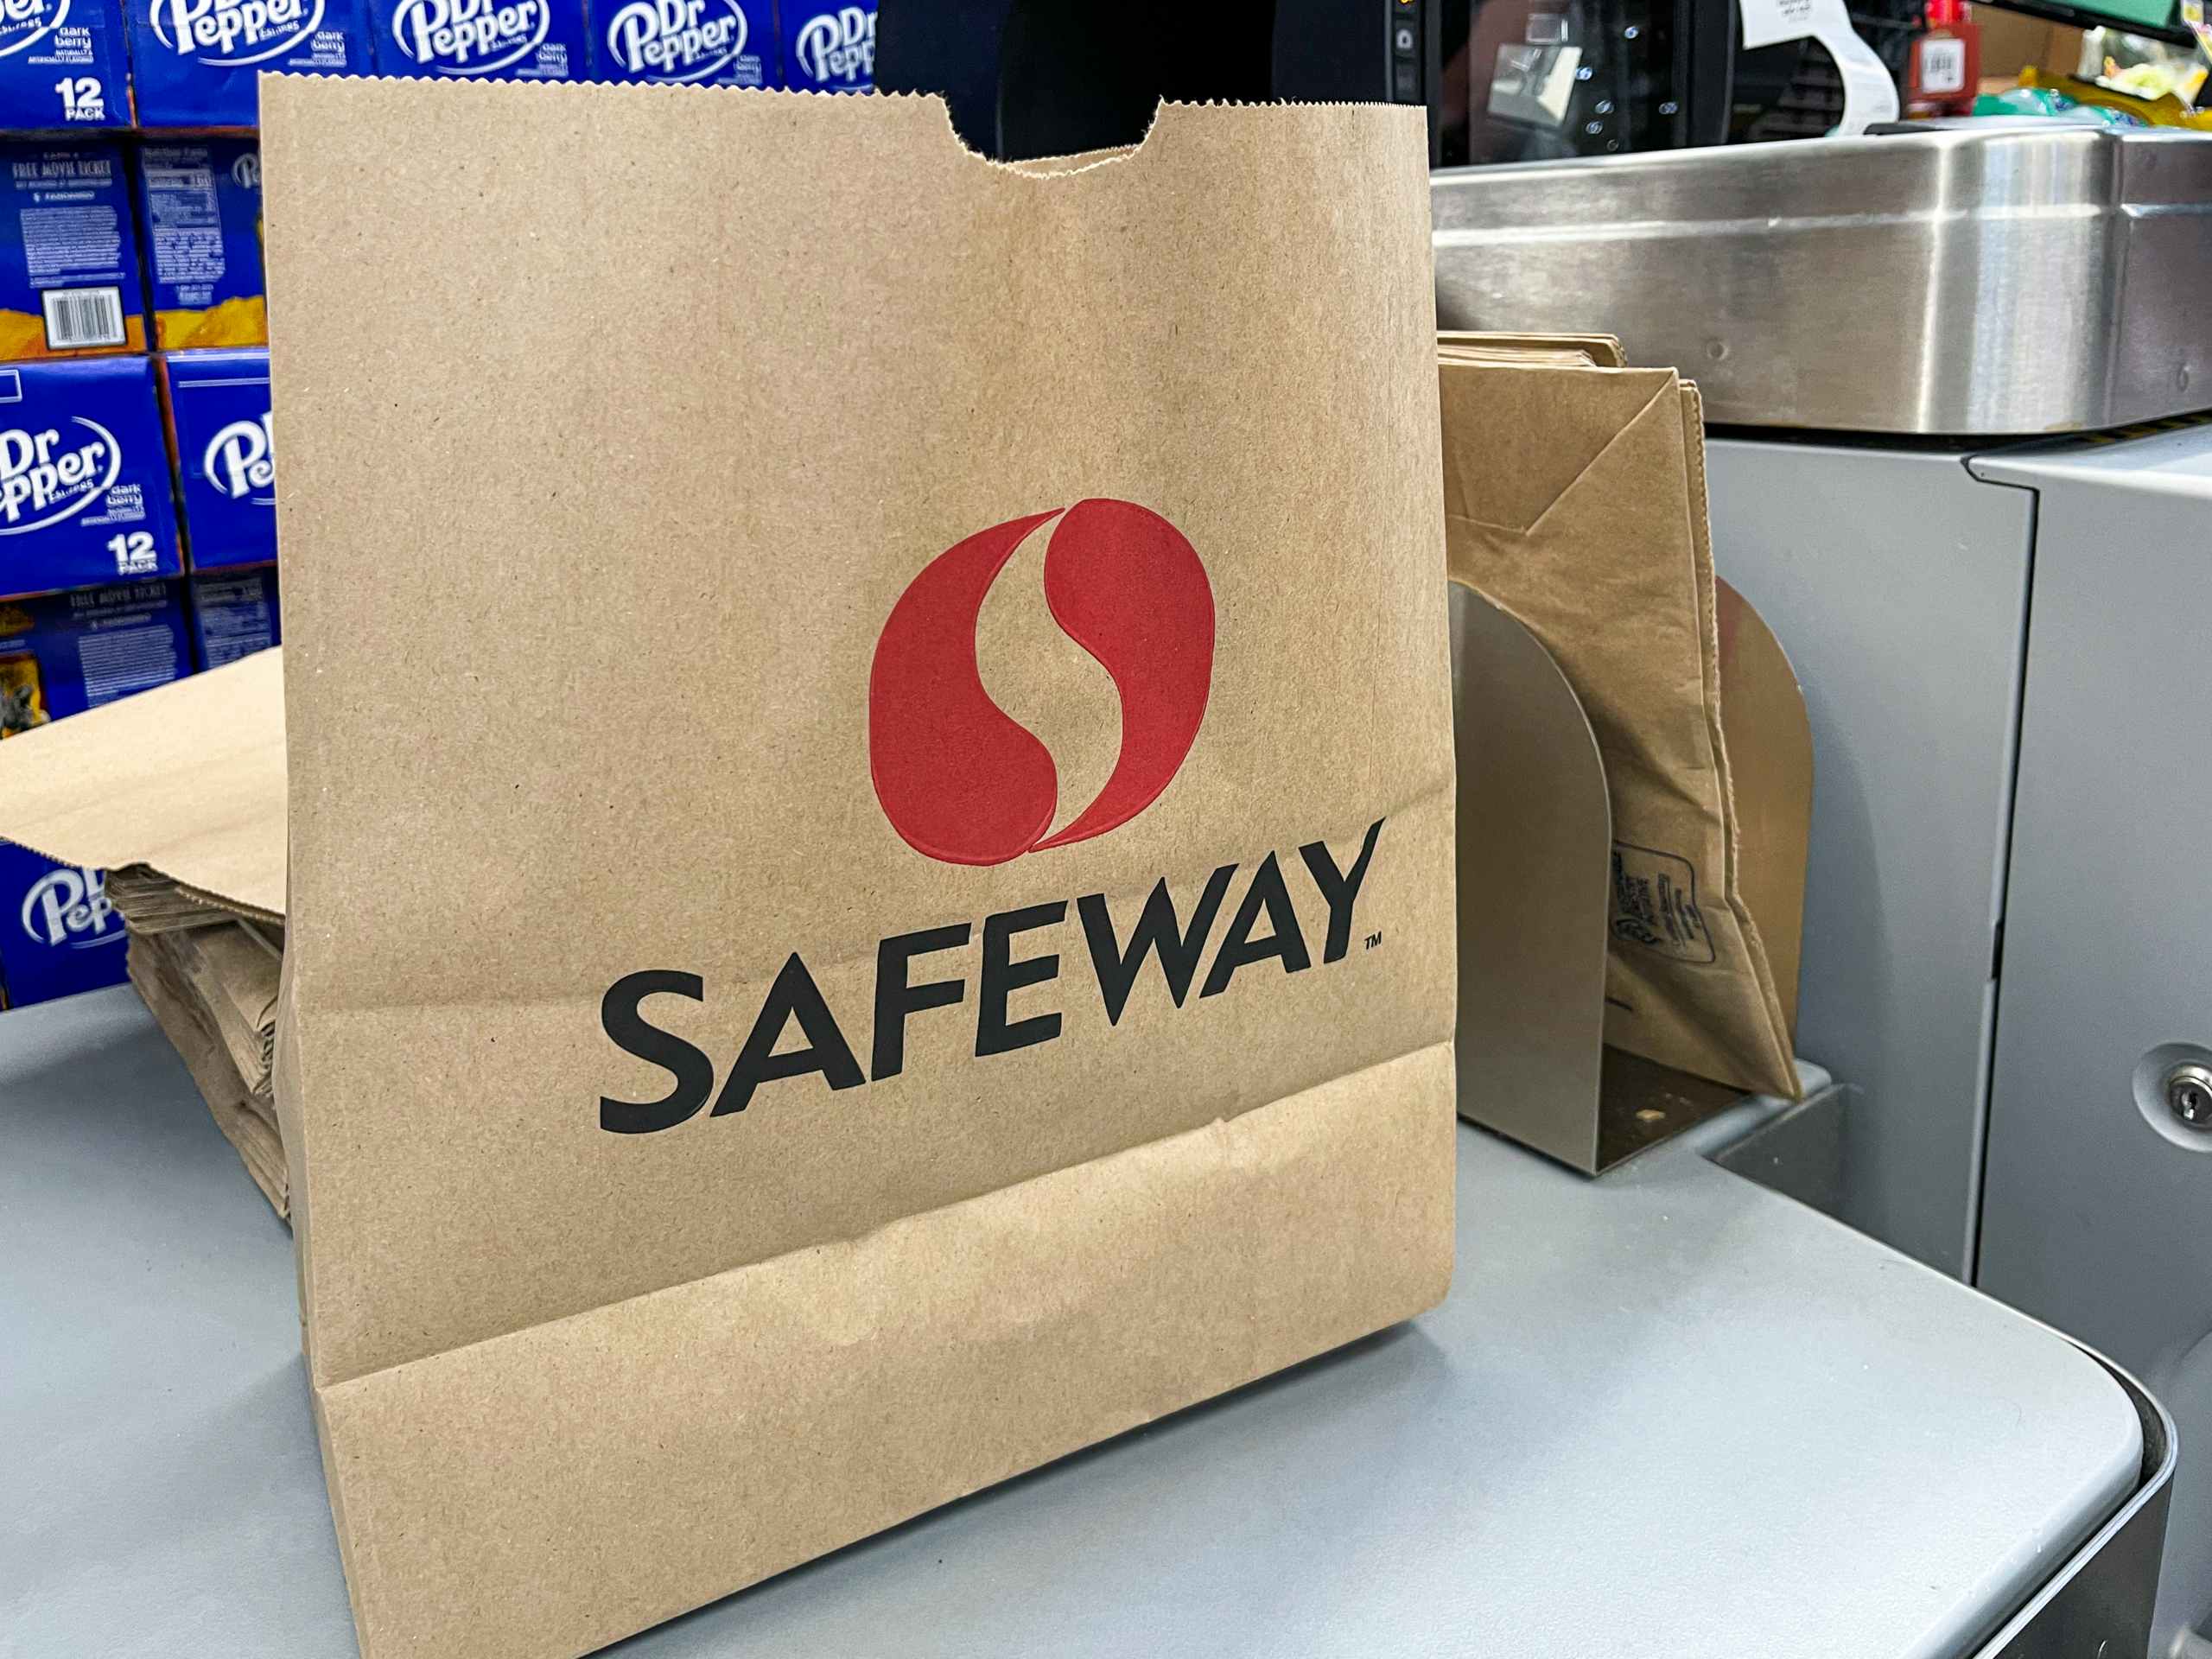 A paper Safeway bag next to the checkout scanner at Safeway.